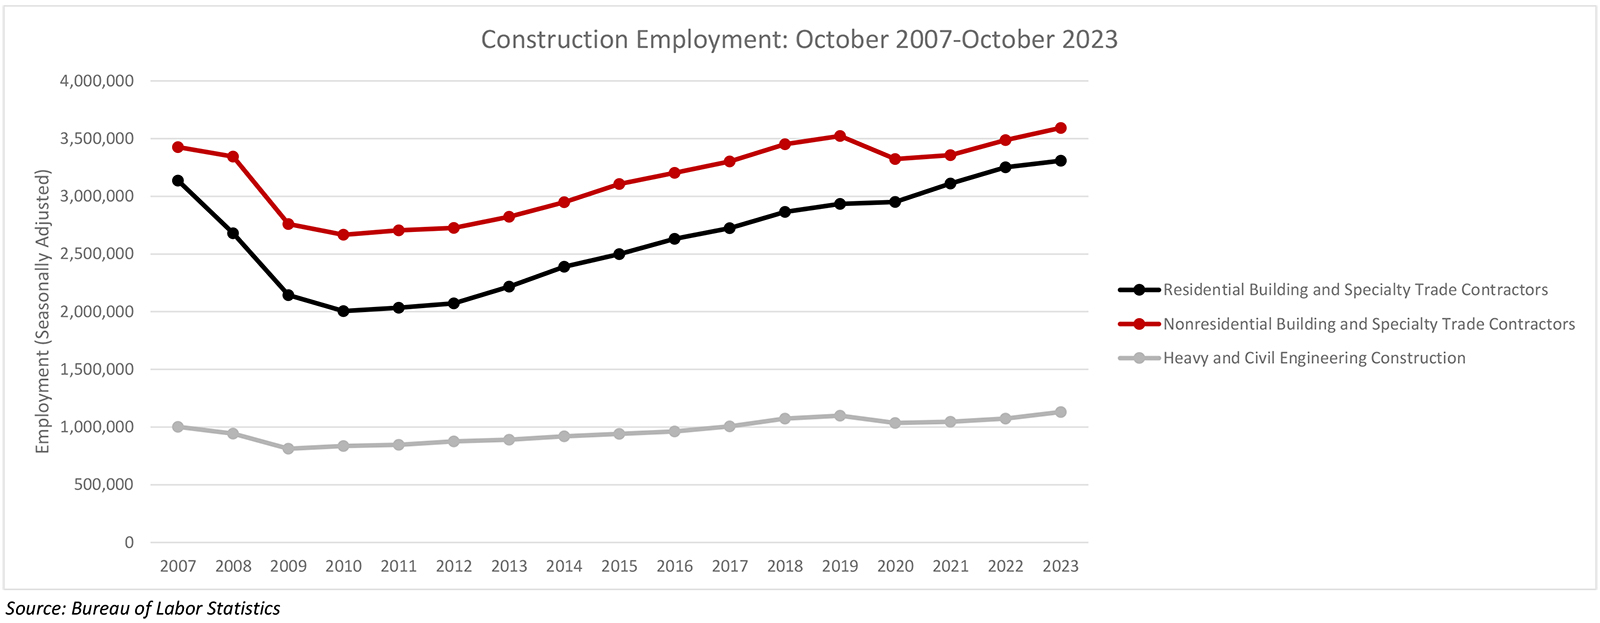 Nonresidential Construction Employment Increased by 8,400 in October